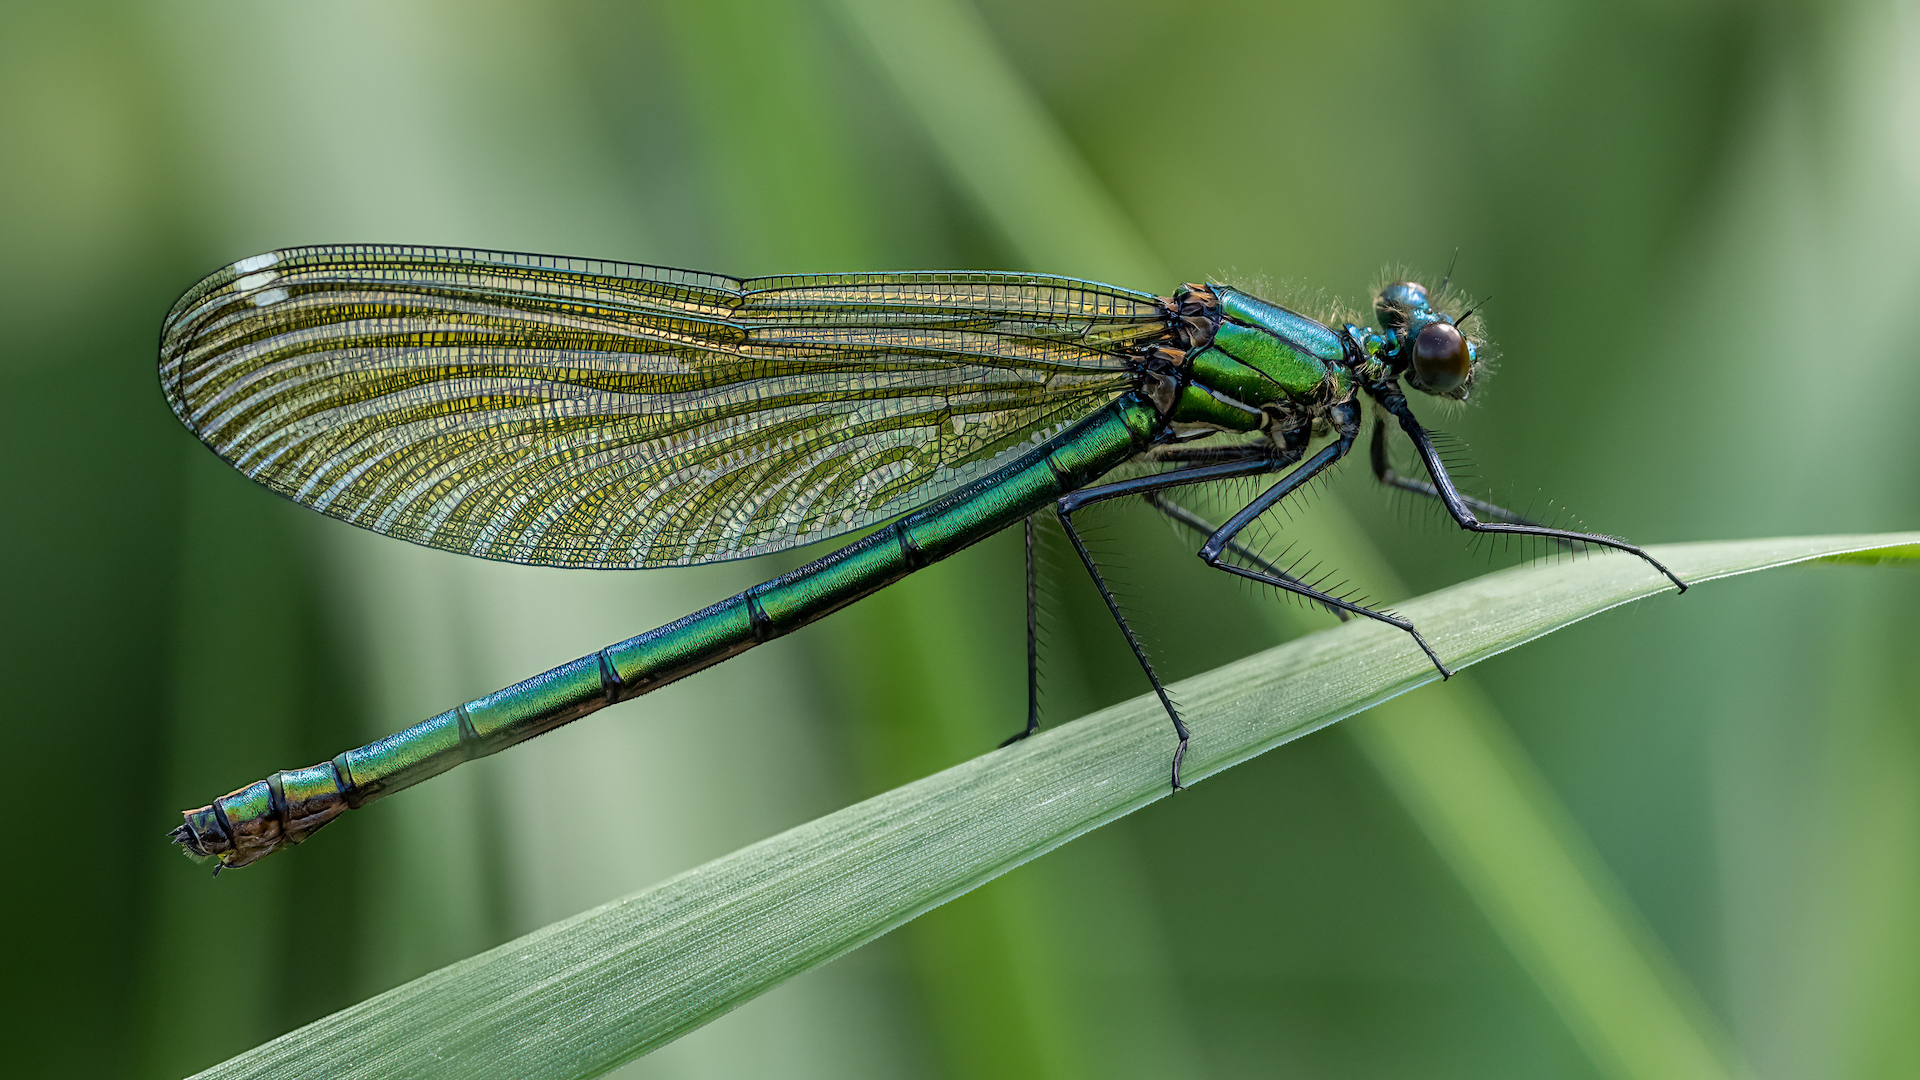 A close-up of a dragonfly on a plant